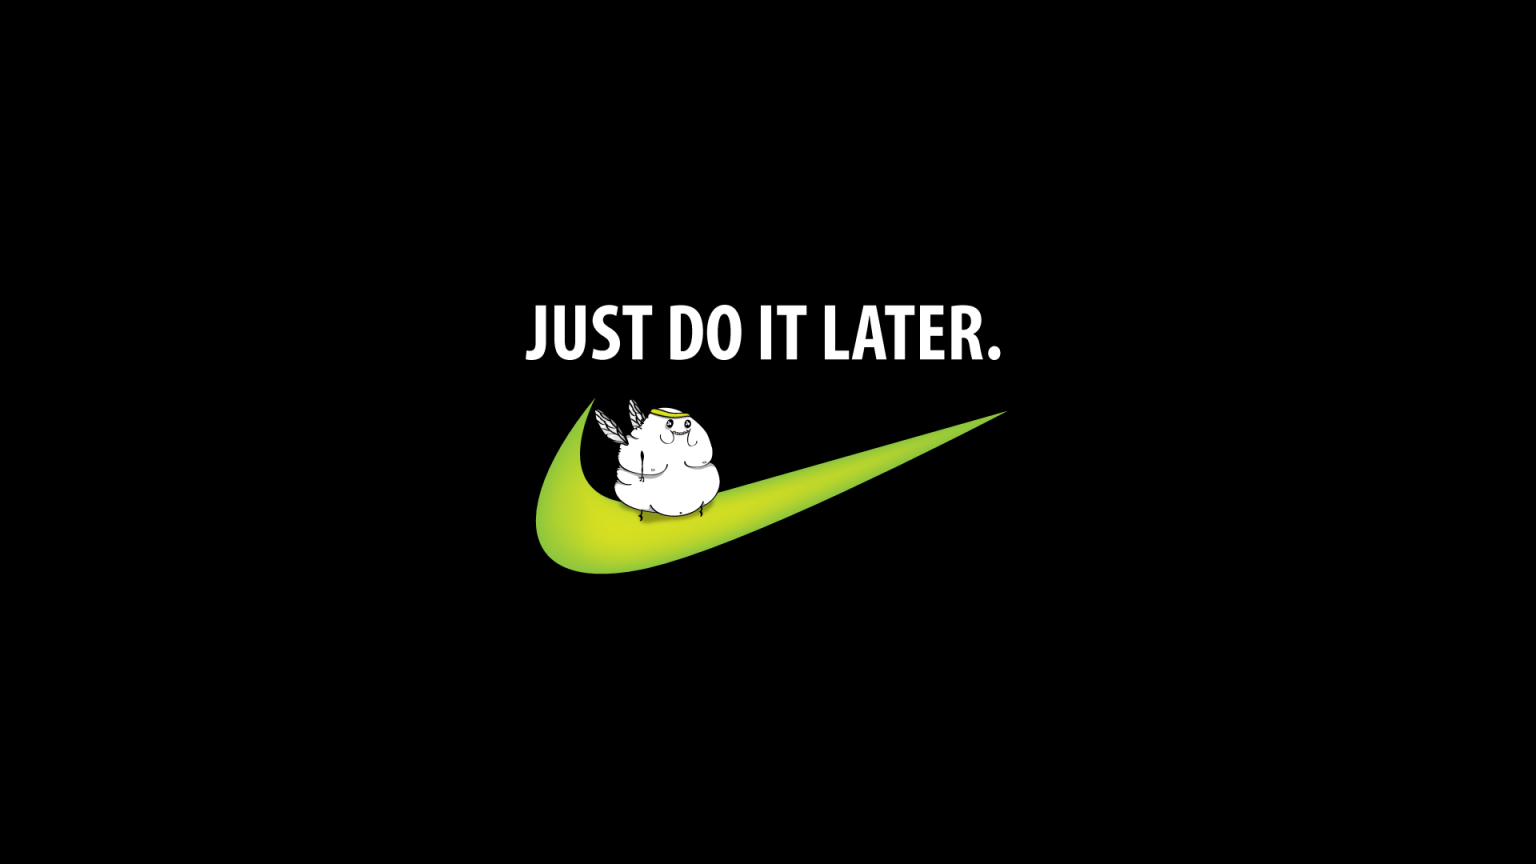 Free download Nike Motivational Quotes Wallpaper Just do it later